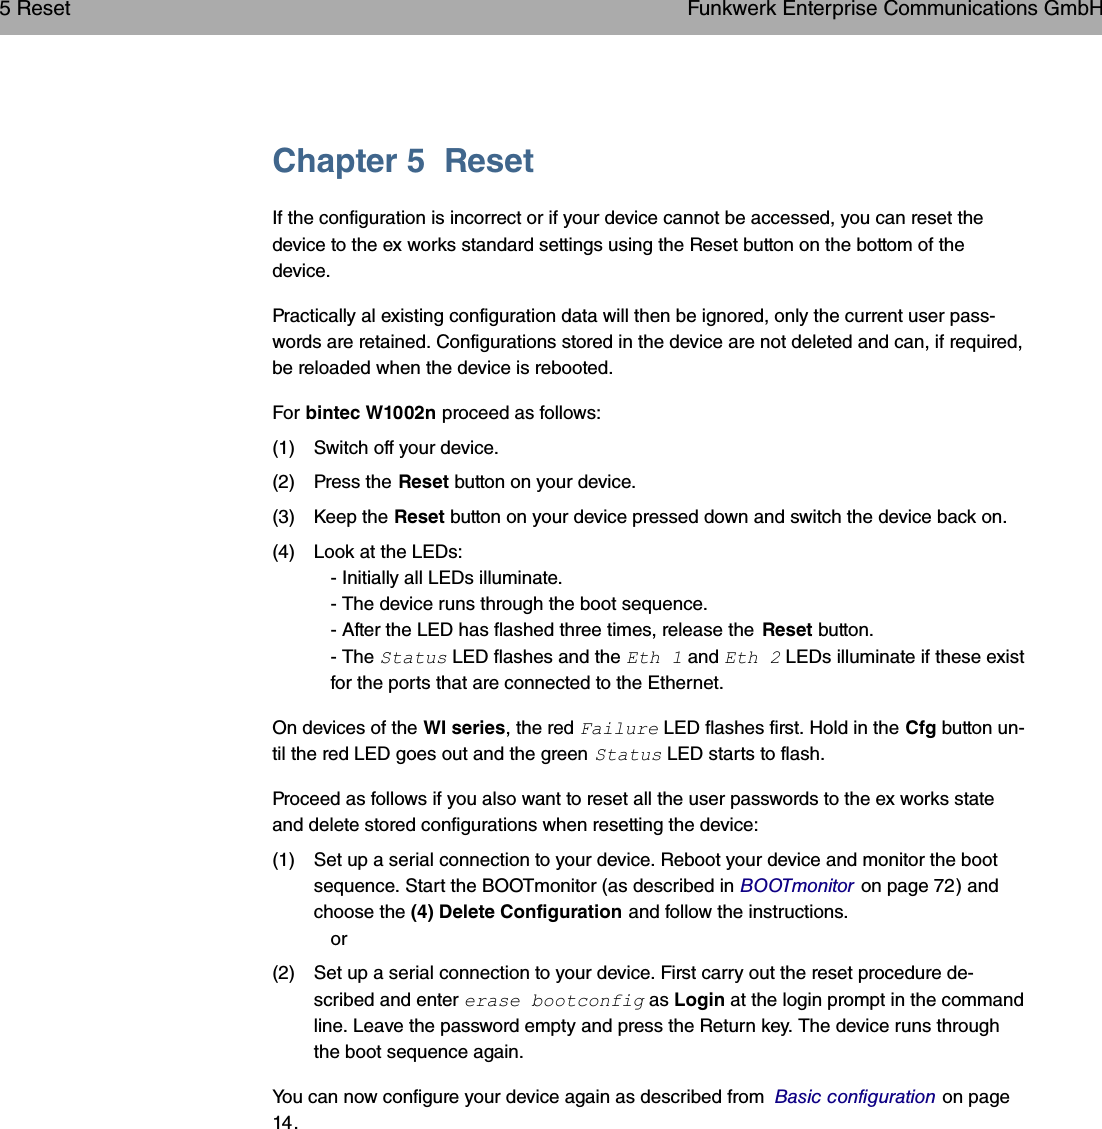 Chapter 5 ResetIf the configuration is incorrect or if your device cannot be accessed, you can reset thedevice to the ex works standard settings using the Reset button on the bottom of thedevice.Practically al existing configuration data will then be ignored, only the current user pass-words are retained. Configurations stored in the device are not deleted and can, if required,be reloaded when the device is rebooted.For bintec W1002n proceed as follows:(1) Switch off your device.(2) Press the Reset button on your device.(3) Keep the Reset button on your device pressed down and switch the device back on.(4) Look at the LEDs:- Initially all LEDs illuminate.- The device runs through the boot sequence.- After the LED has flashed three times, release the Reset button.- The &quot;&quot;  LED flashes and the *&quot;0  and *&quot;0  LEDs illuminate if these existfor the ports that are connected to the Ethernet.On devices of the WI series, the red ) LED flashes first. Hold in the Cfg button un-til the red LED goes out and the green &quot;&quot;  LED starts to flash.Proceed as follows if you also want to reset all the user passwords to the ex works stateand delete stored configurations when resetting the device:(1) Set up a serial connection to your device. Reboot your device and monitor the bootsequence. Start the BOOTmonitor (as described in BOOTmonitor on page 72) andchoose the (4) Delete Configuration and follow the instructions.or(2) Set up a serial connection to your device. First carry out the reset procedure de-scribed and enter   #&quot;$ as Login at the login prompt in the commandline. Leave the password empty and press the Return key. The device runs throughthe boot sequence again.You can now configure your device again as described from Basic configuration on page14.5 Reset Funkwerk Enterprise Communications GmbH26 bintec WLAN and Industrial WLAN